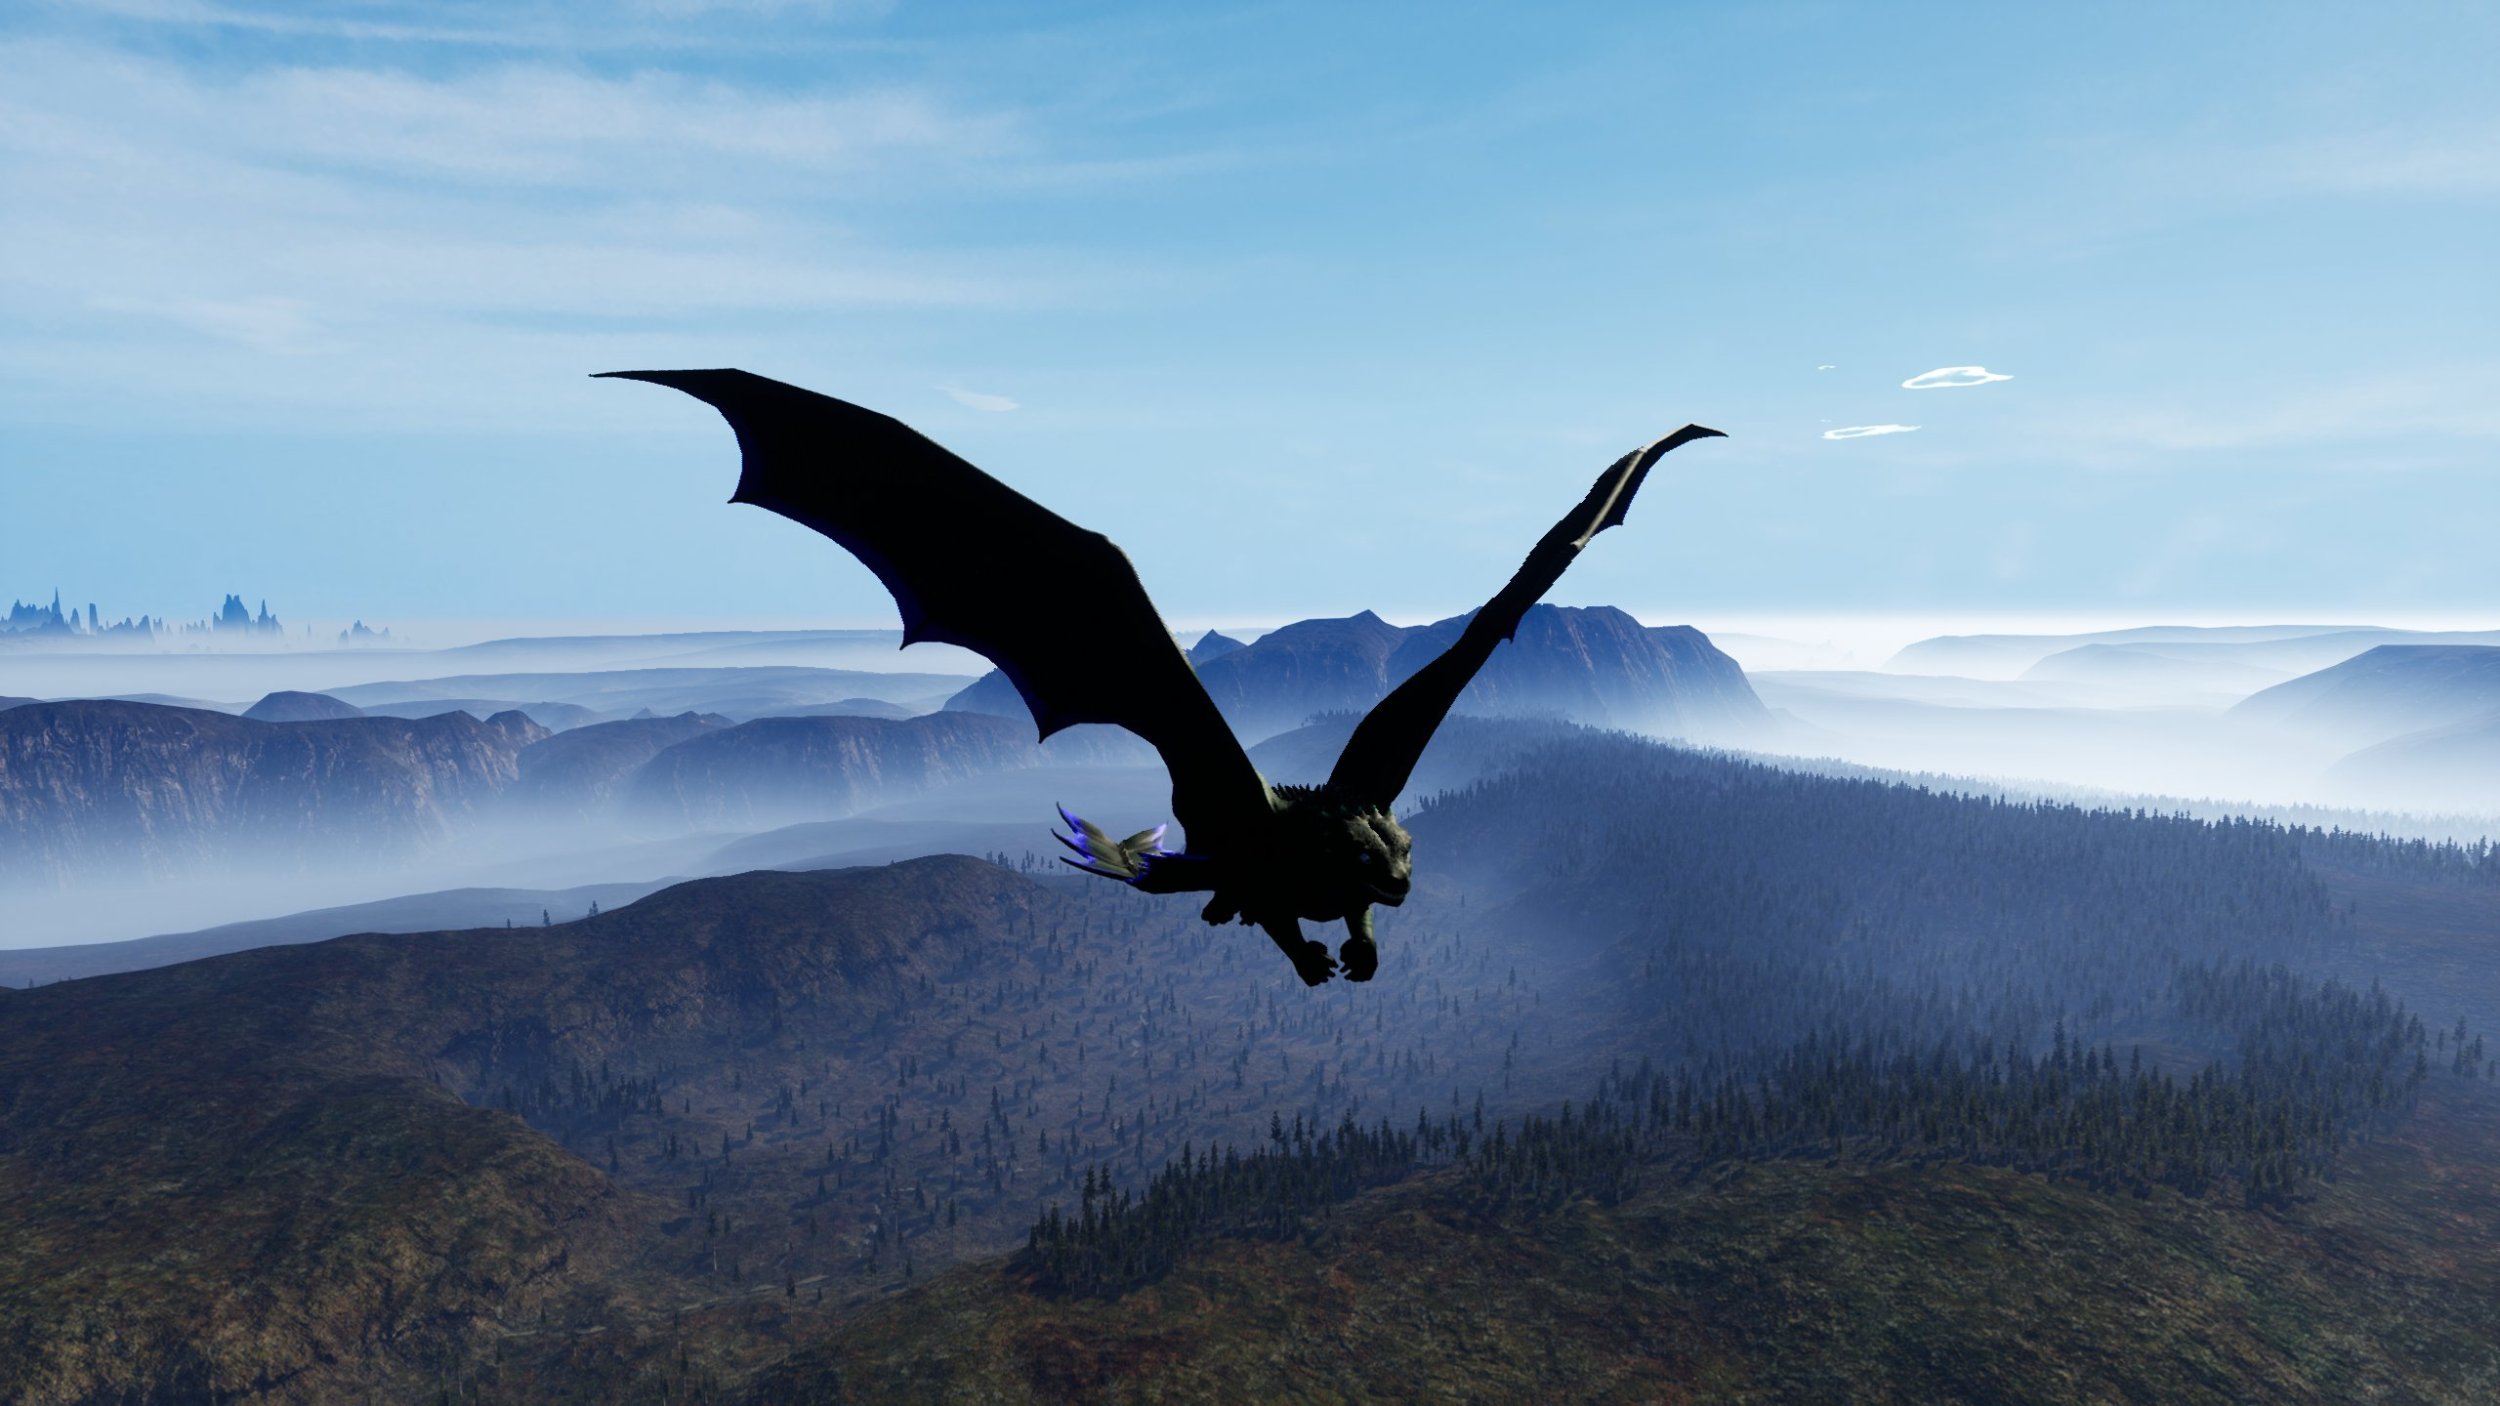 Day of Dragons Beta Update 1.L Introduces Spined Scarab and Other New